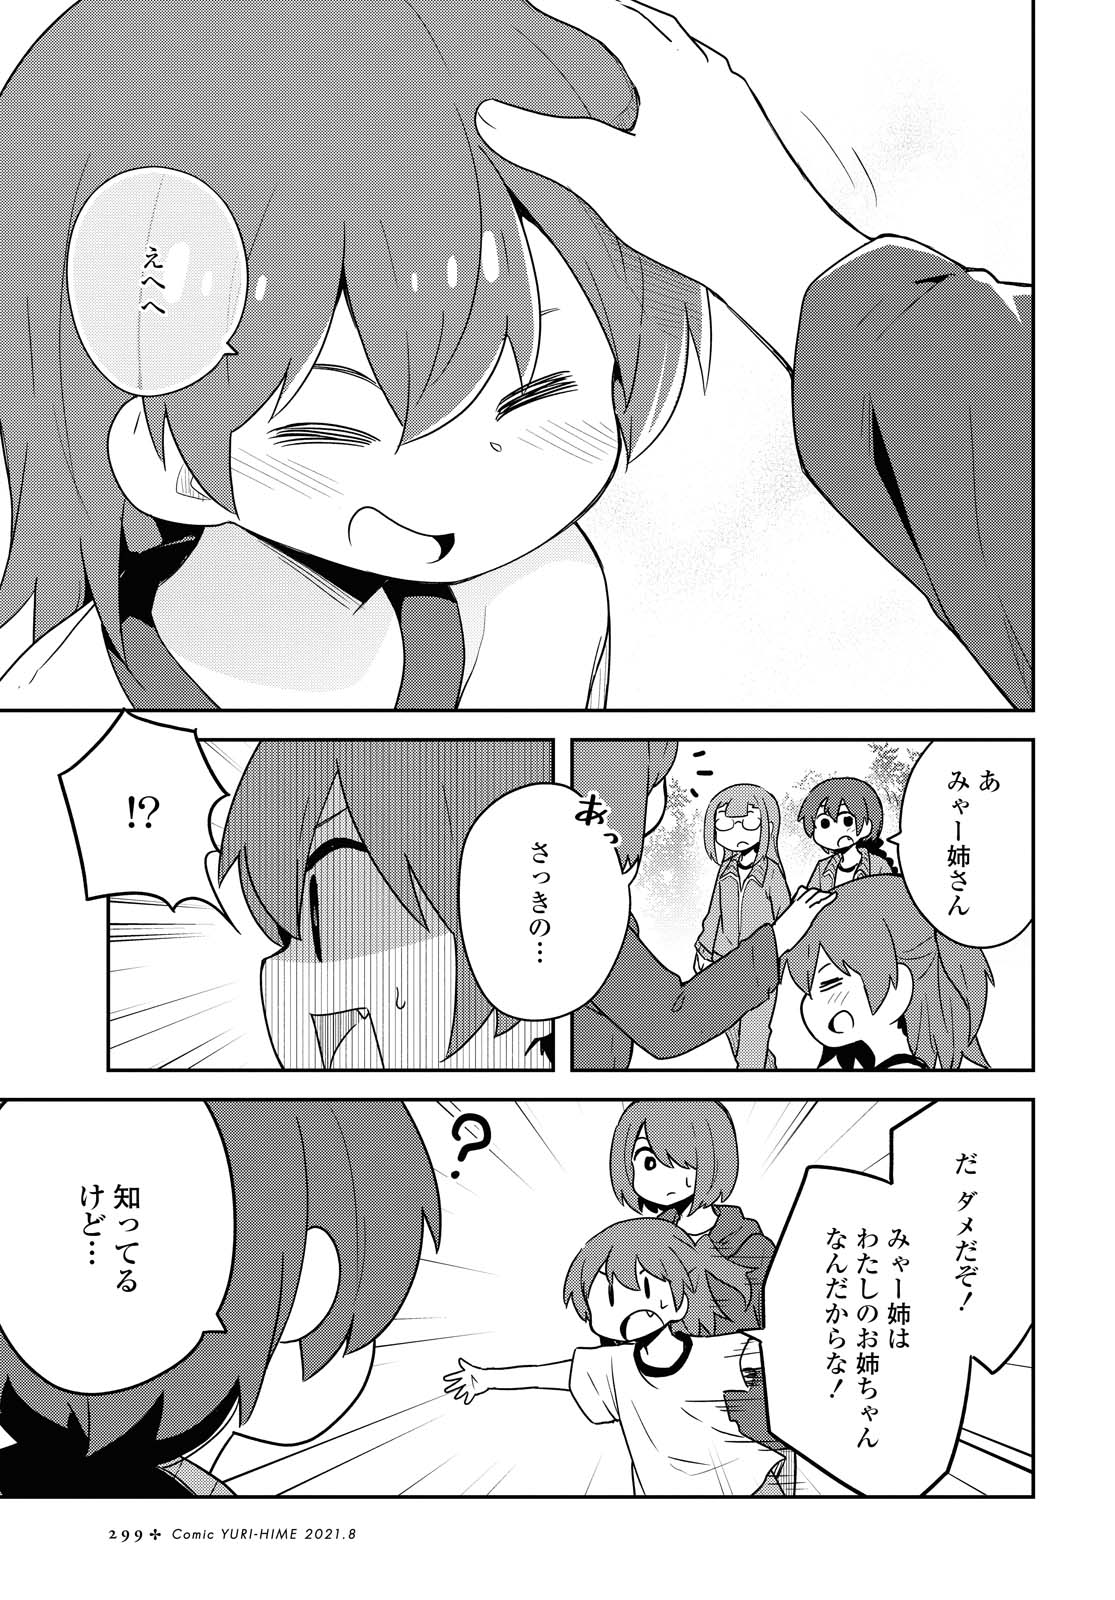 Wataten! An Angel Flew Down to Me 私に天使が舞い降りた！ 第84話 - Page 15